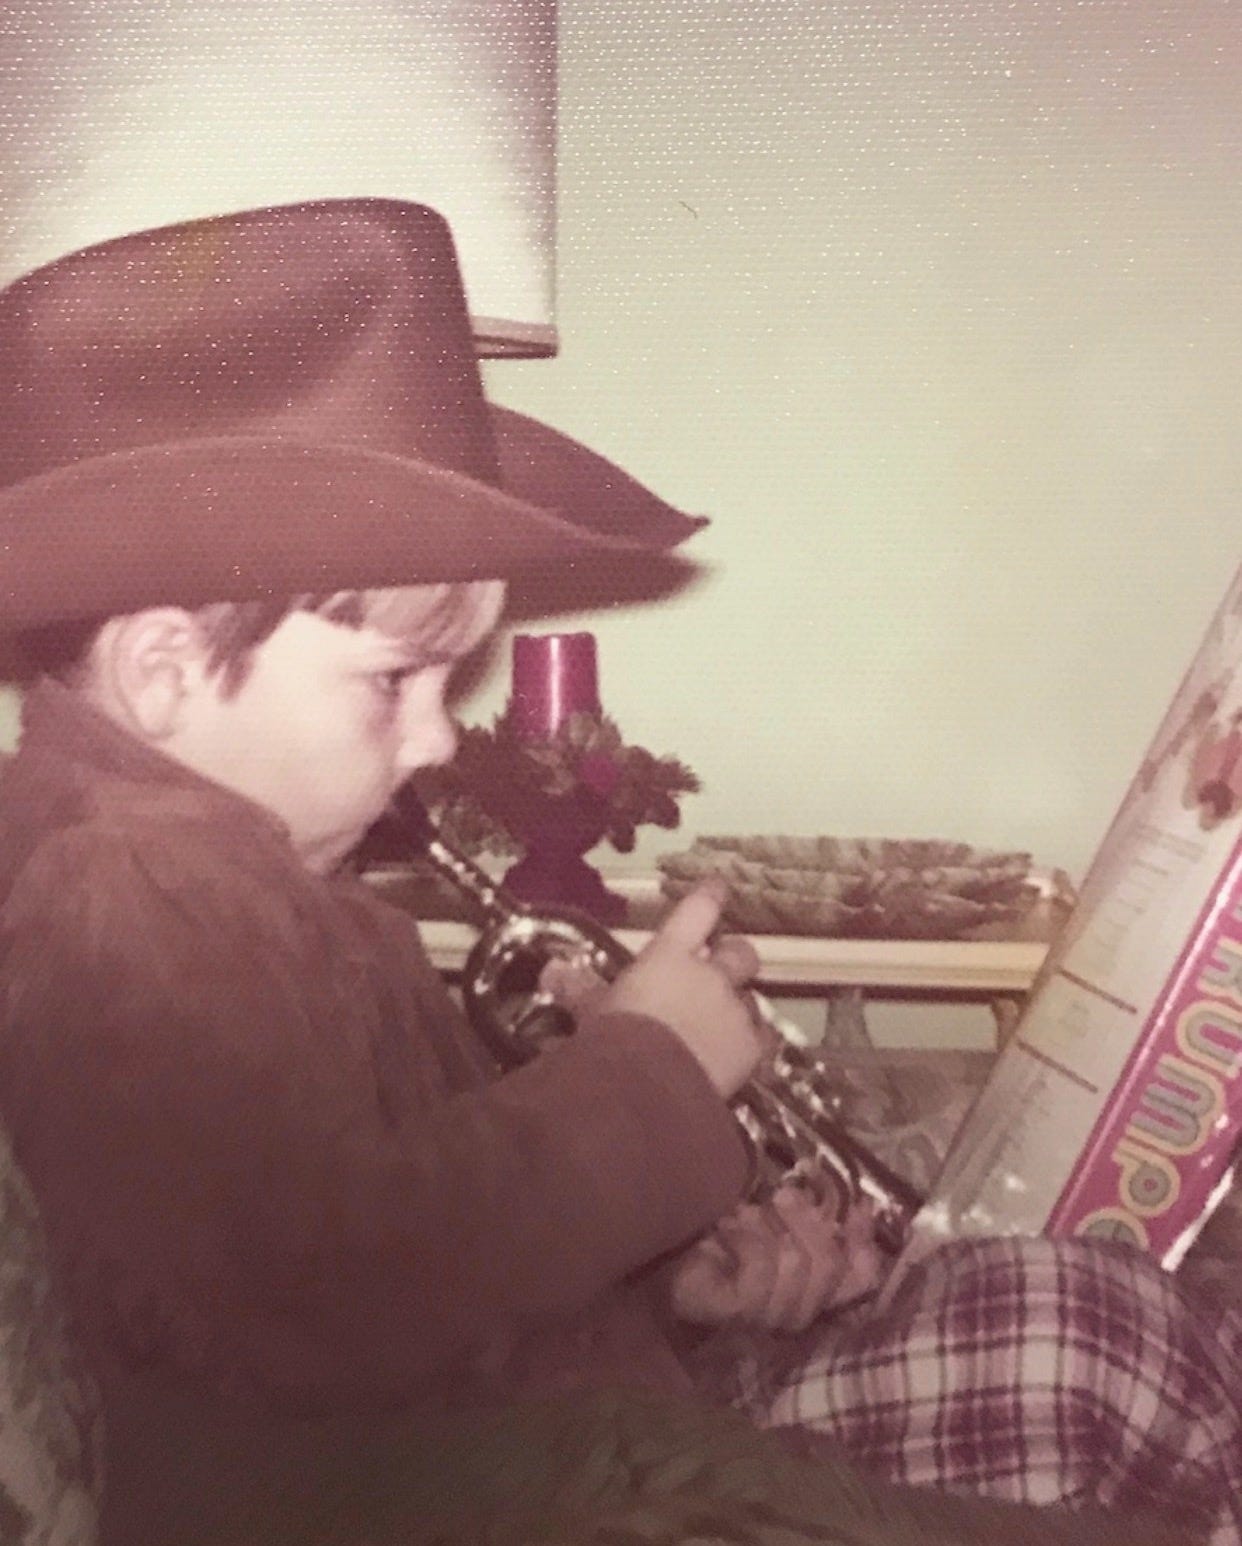 Young Jeff circa 1973 plays a toy trumpet he received for his birthday while wearing a brown cowboy hat and brown jacket.